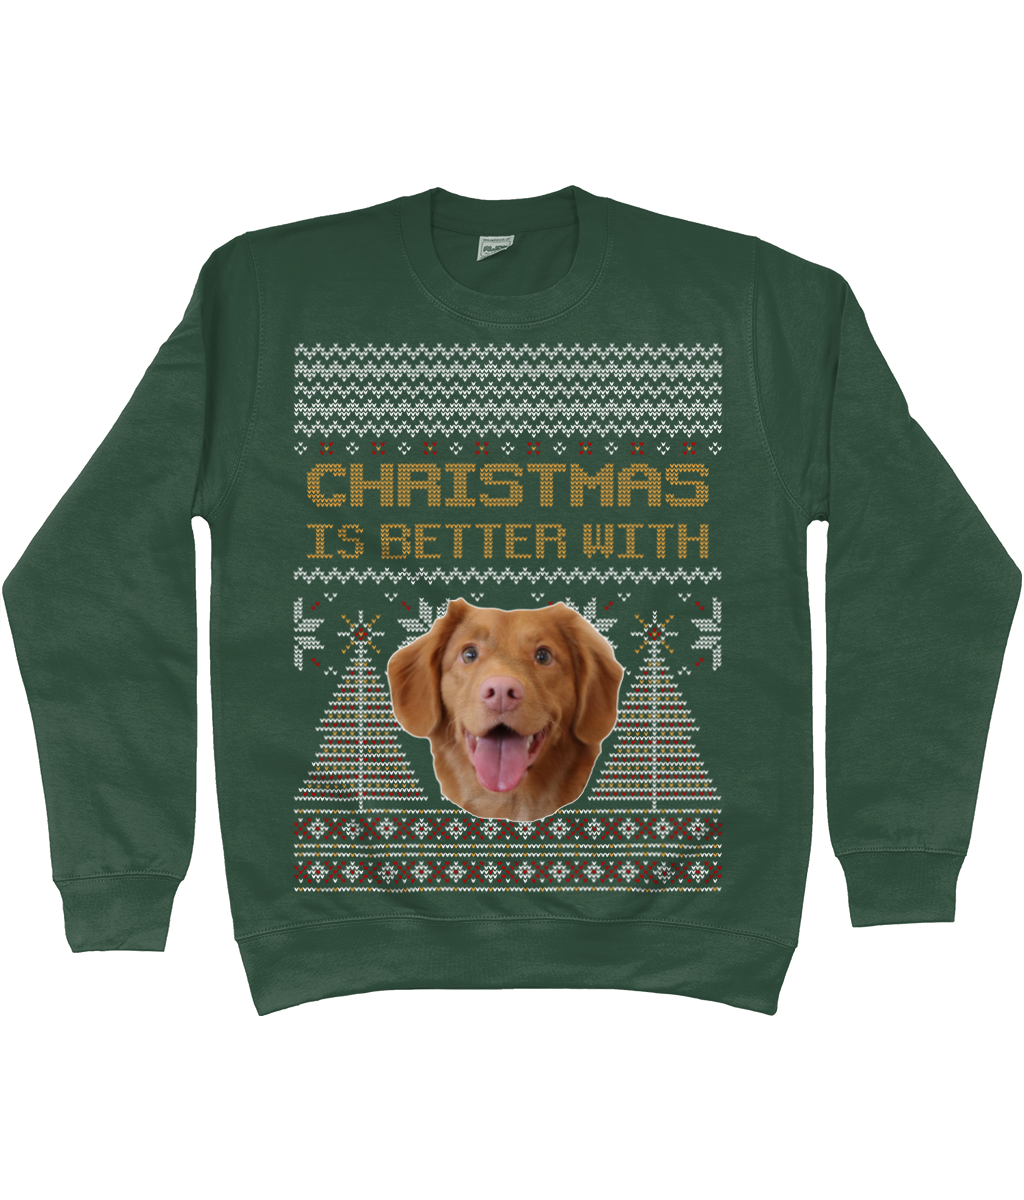 Custom Personalised Christmas Sweatshirt Ugly Sweater Unisex Xmas Gift with Image and 'Christmas Is Better With' text Green